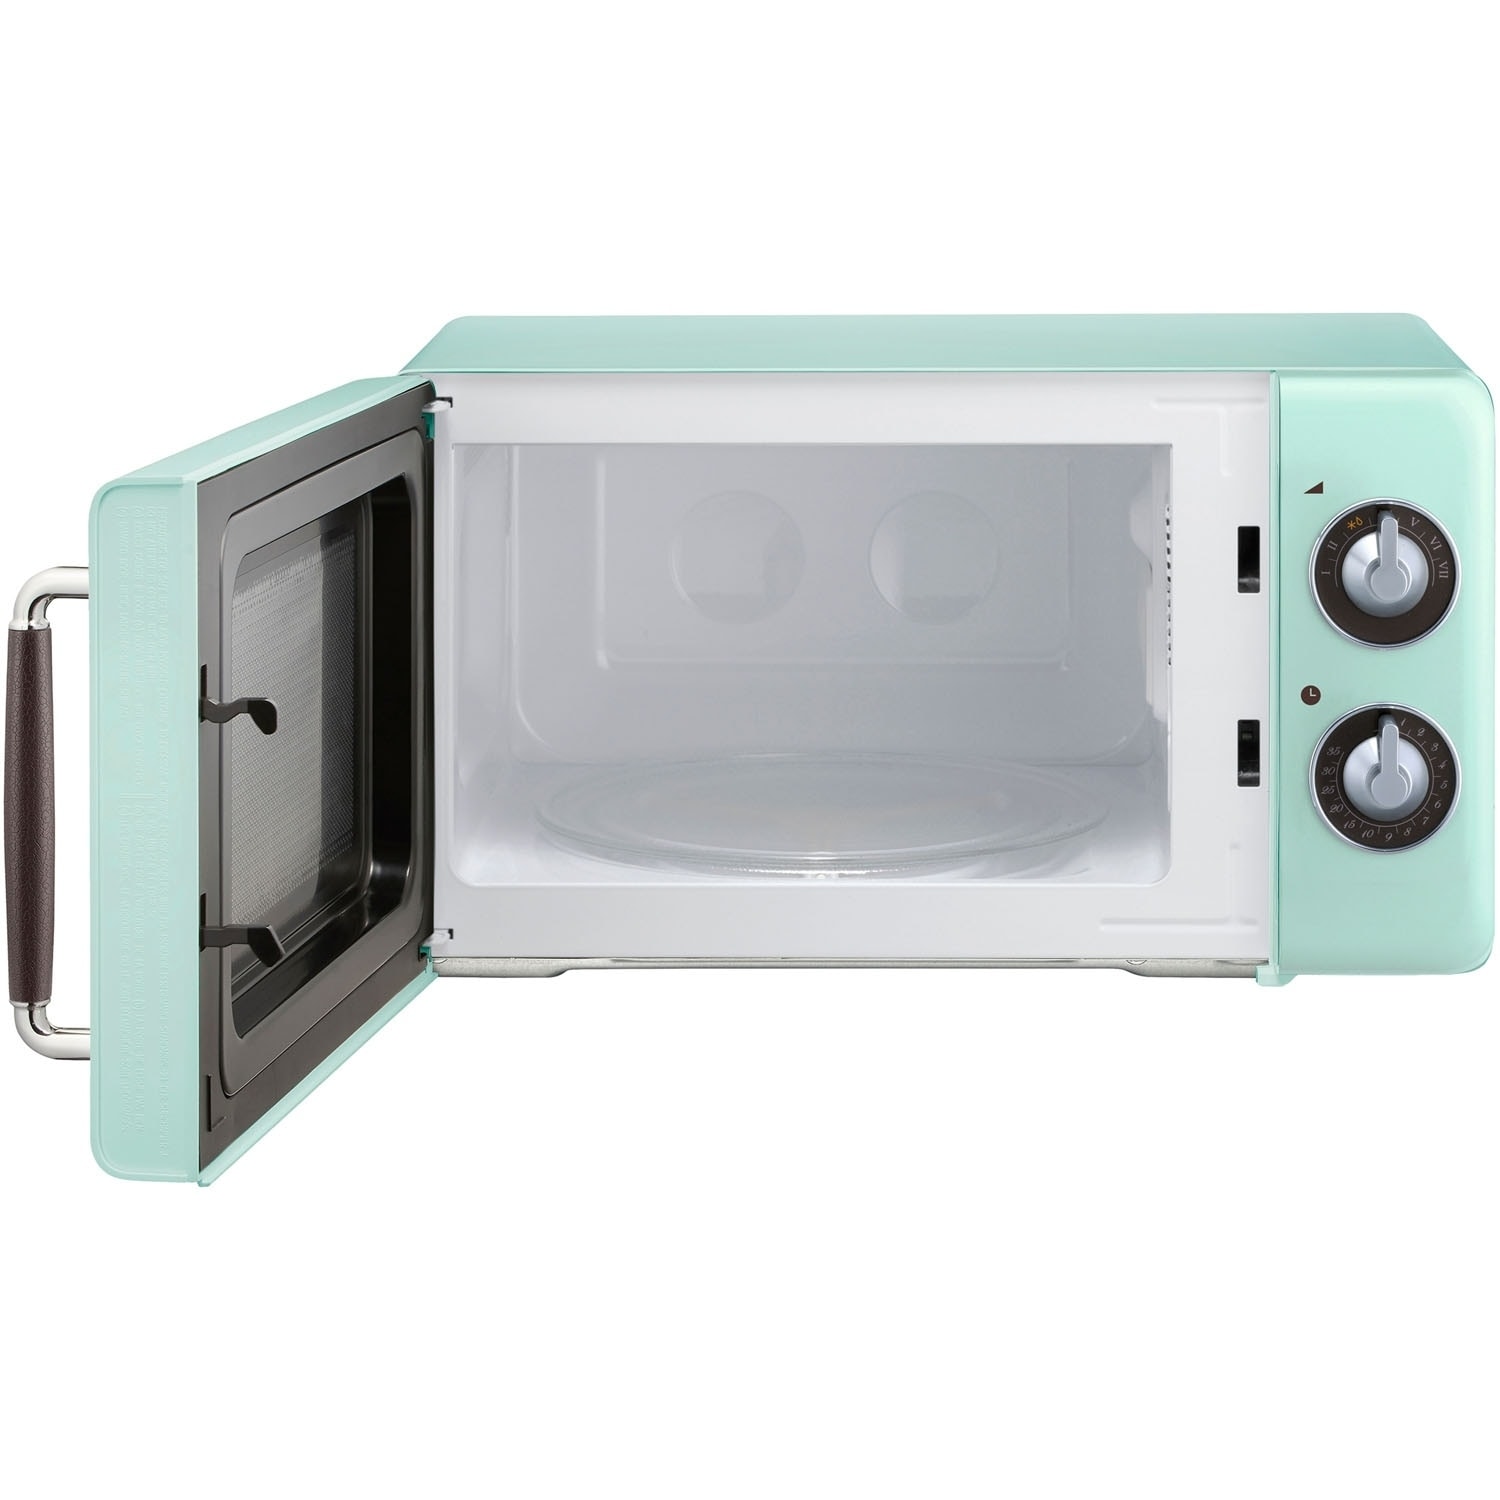 https://ak1.ostkcdn.com/images/products/28764471/Magic-Chef-0.7-Cu.-Ft.-700W-Retro-Countertop-Microwave-Oven-in-Mint-Green-37fd4fe1-3b43-4265-8402-cdf1a6eb12ab.jpg